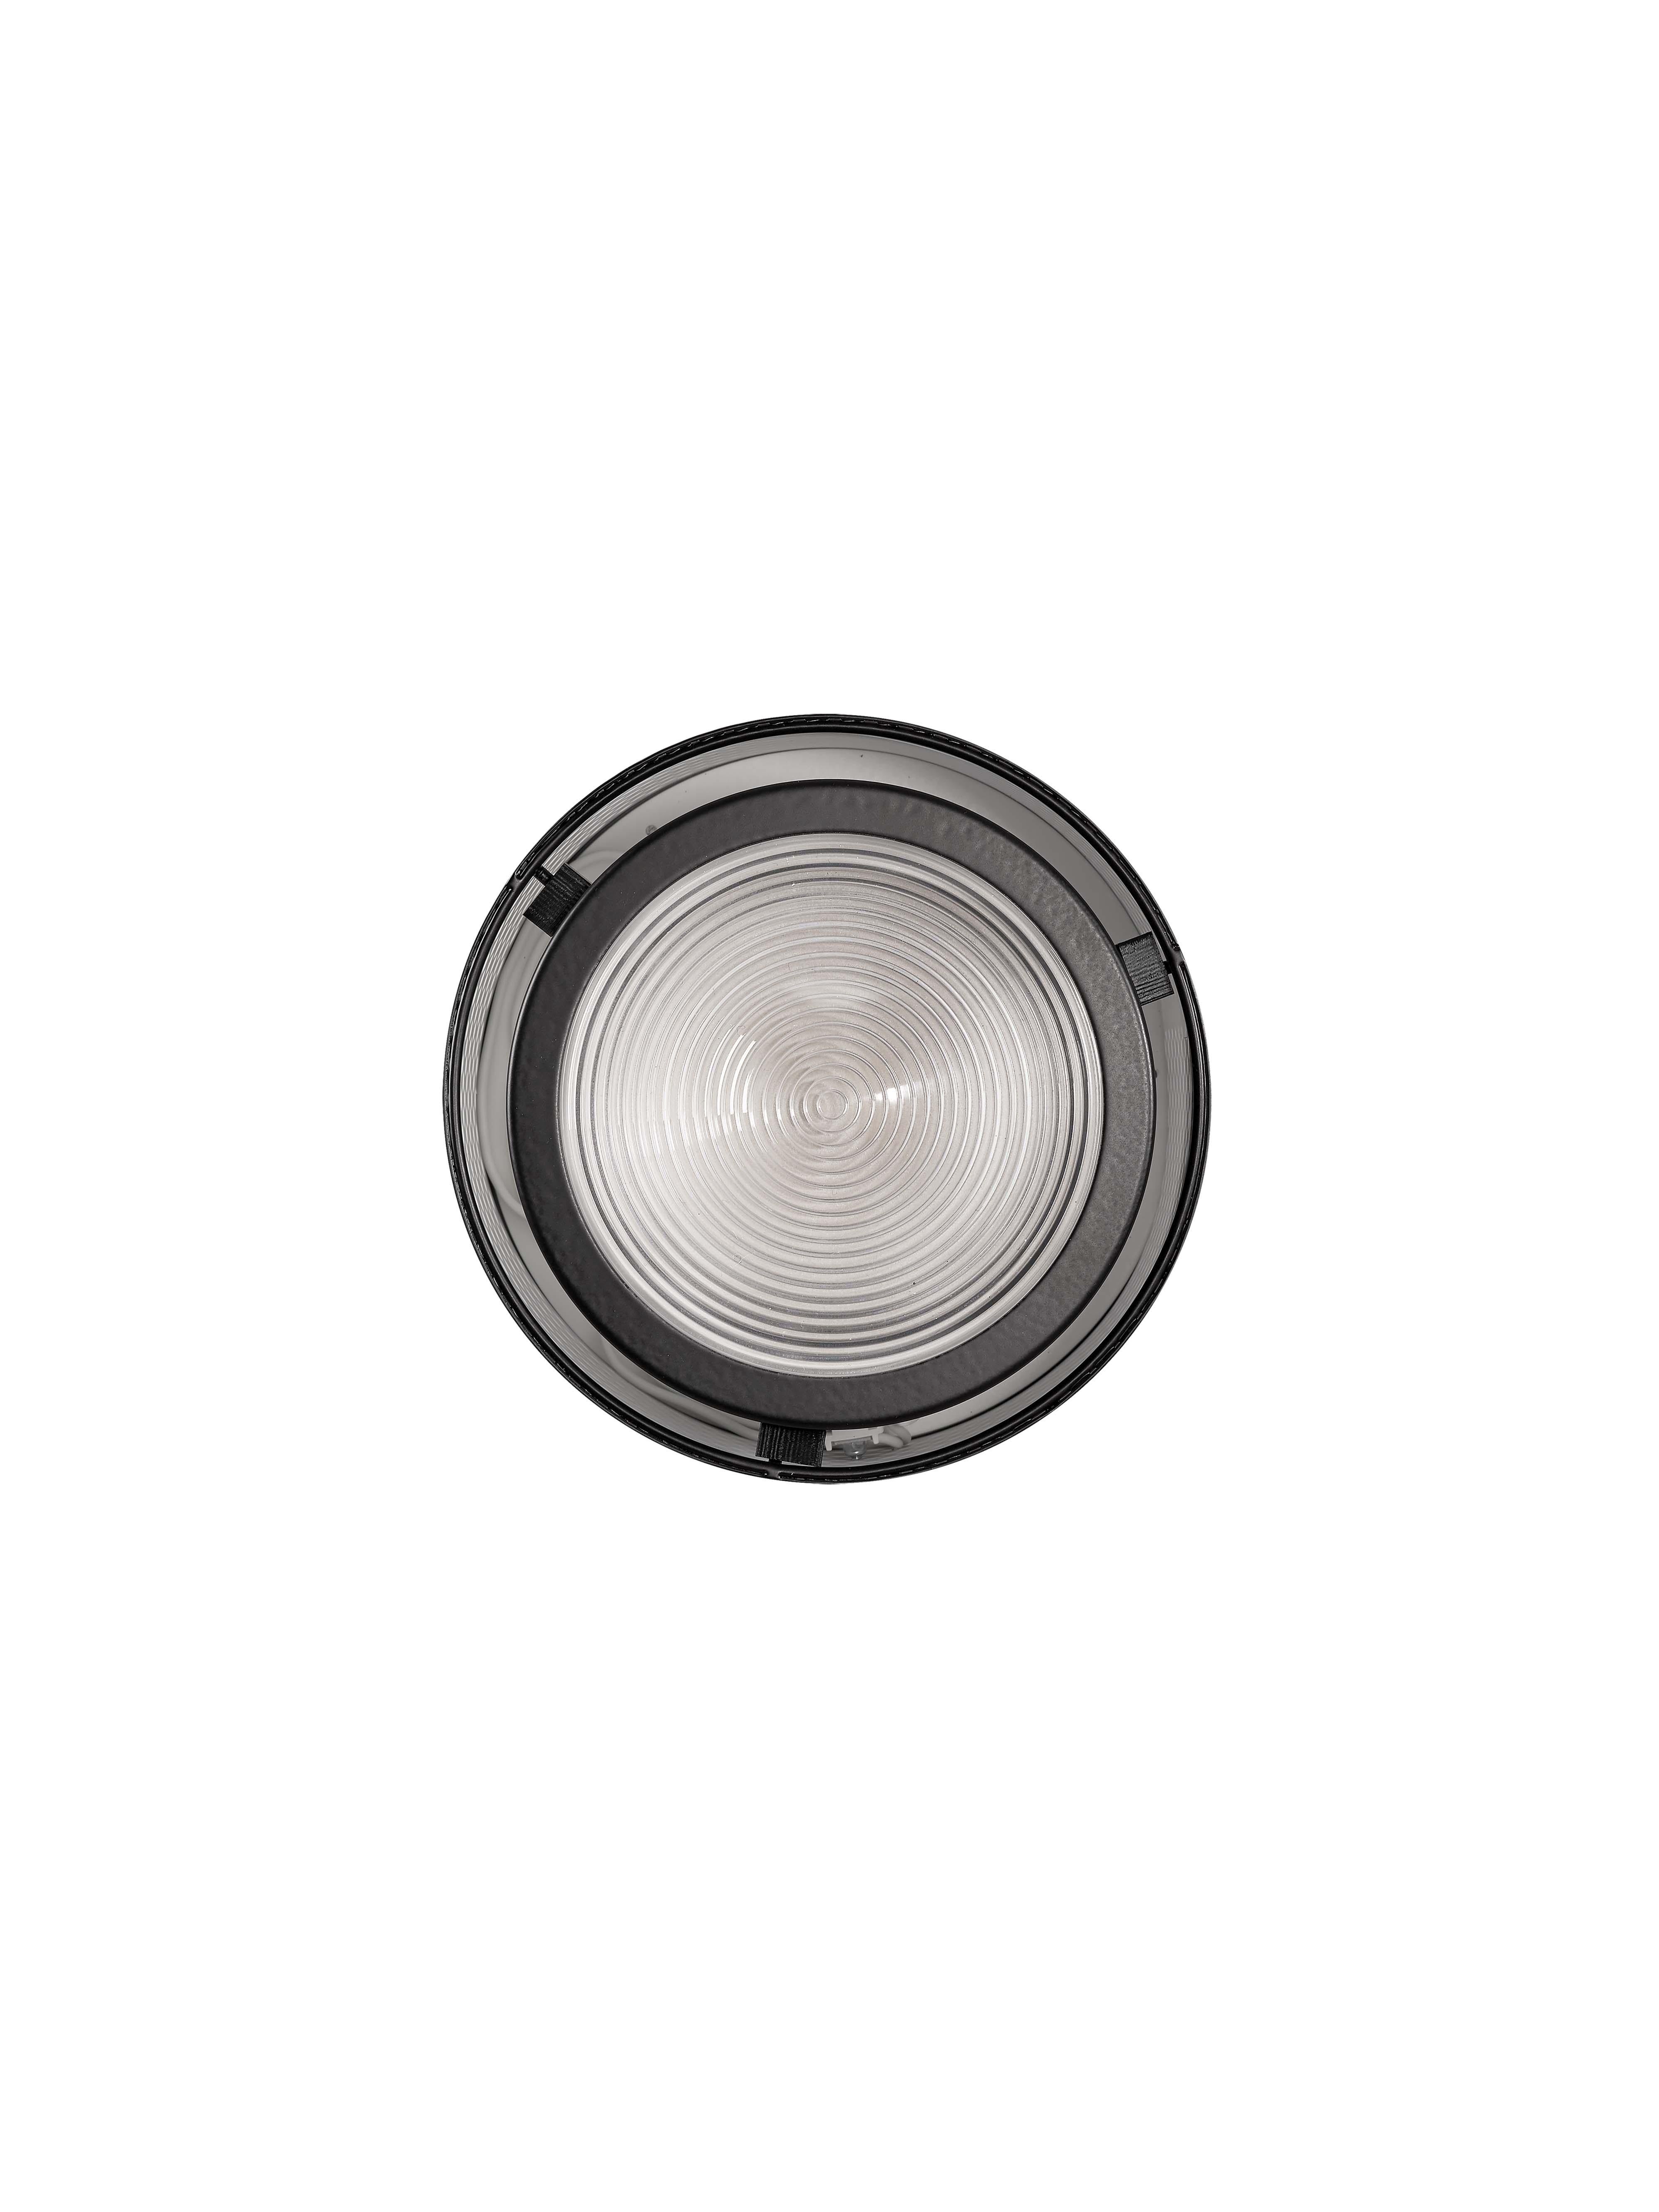 Small Pierre Guariche 'G13' Wall or Ceiling Light for Sammode Studio in Black For Sale 3